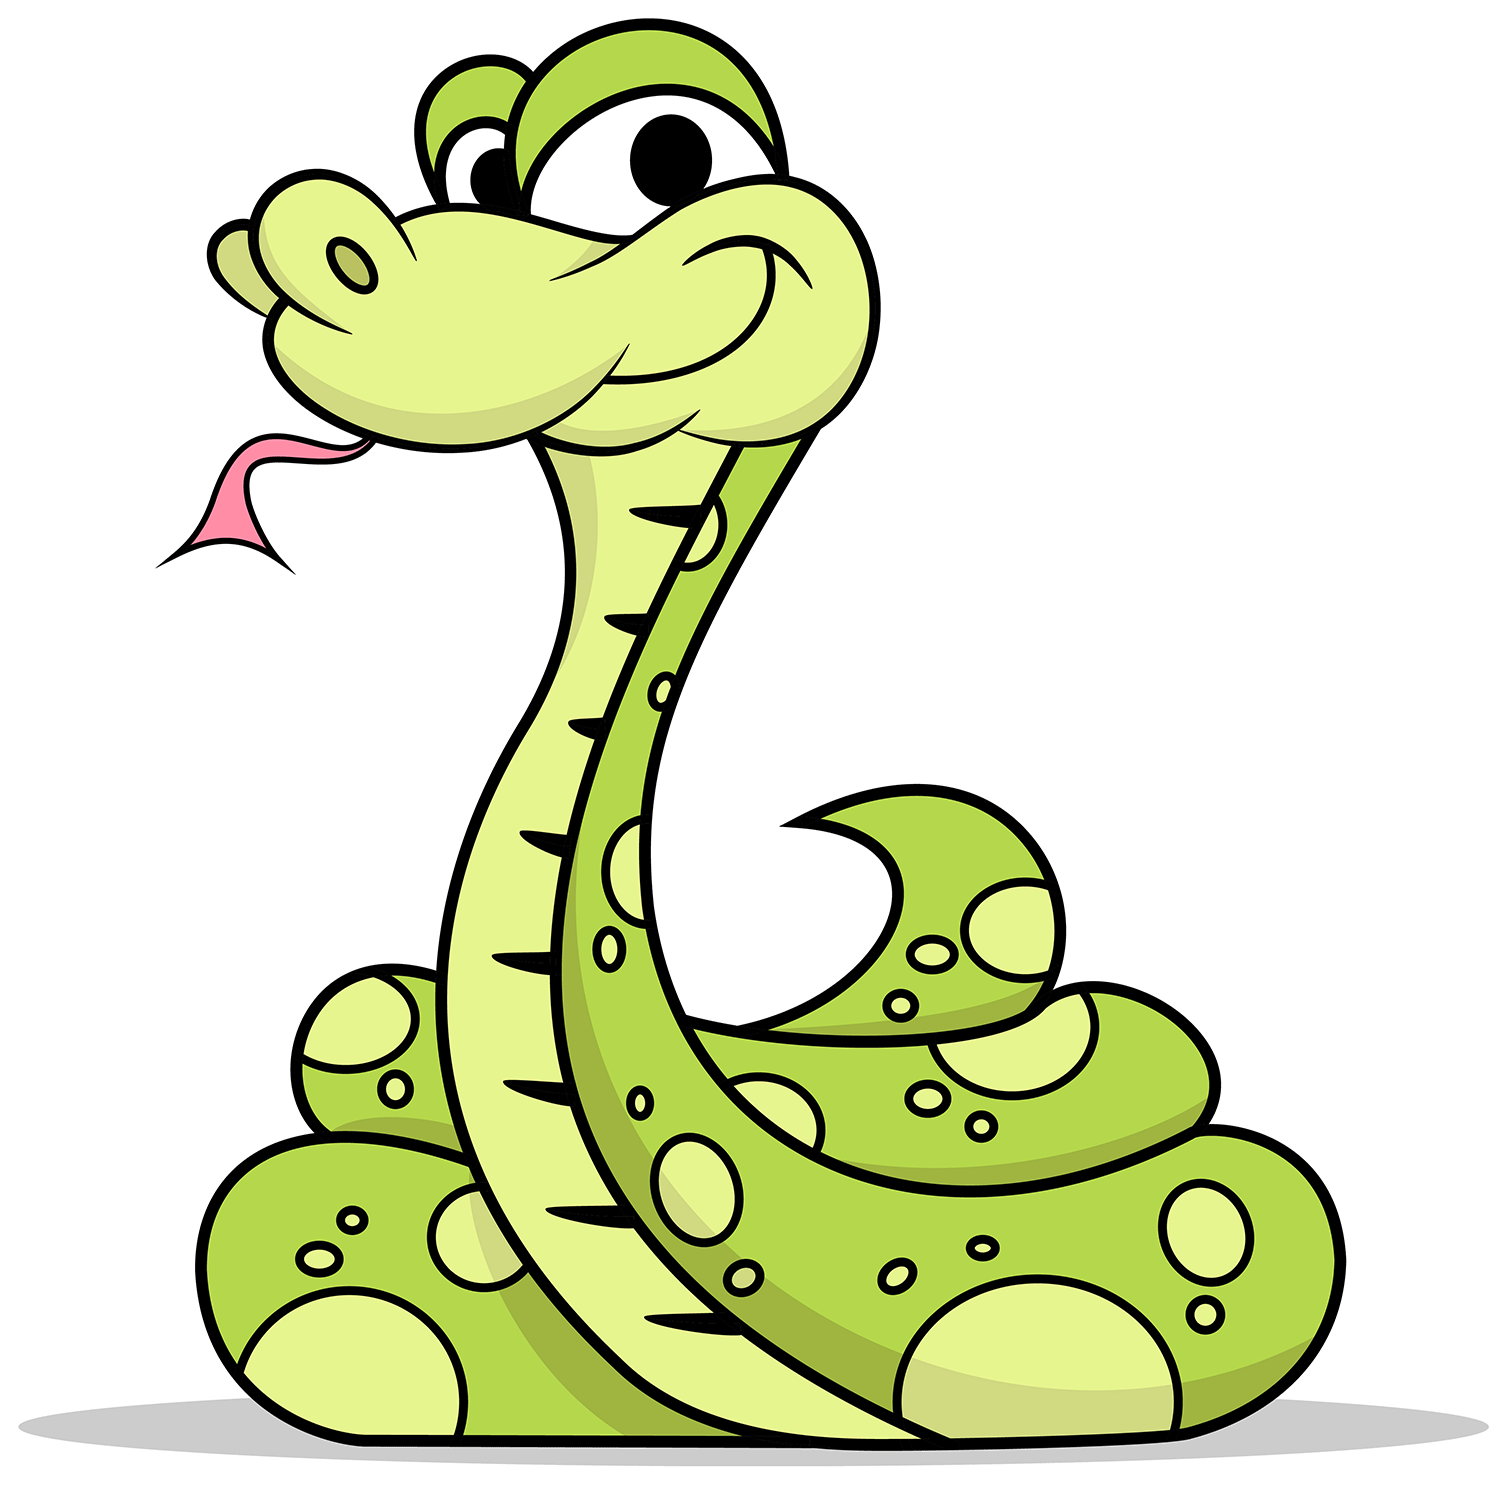 Snake images clipart